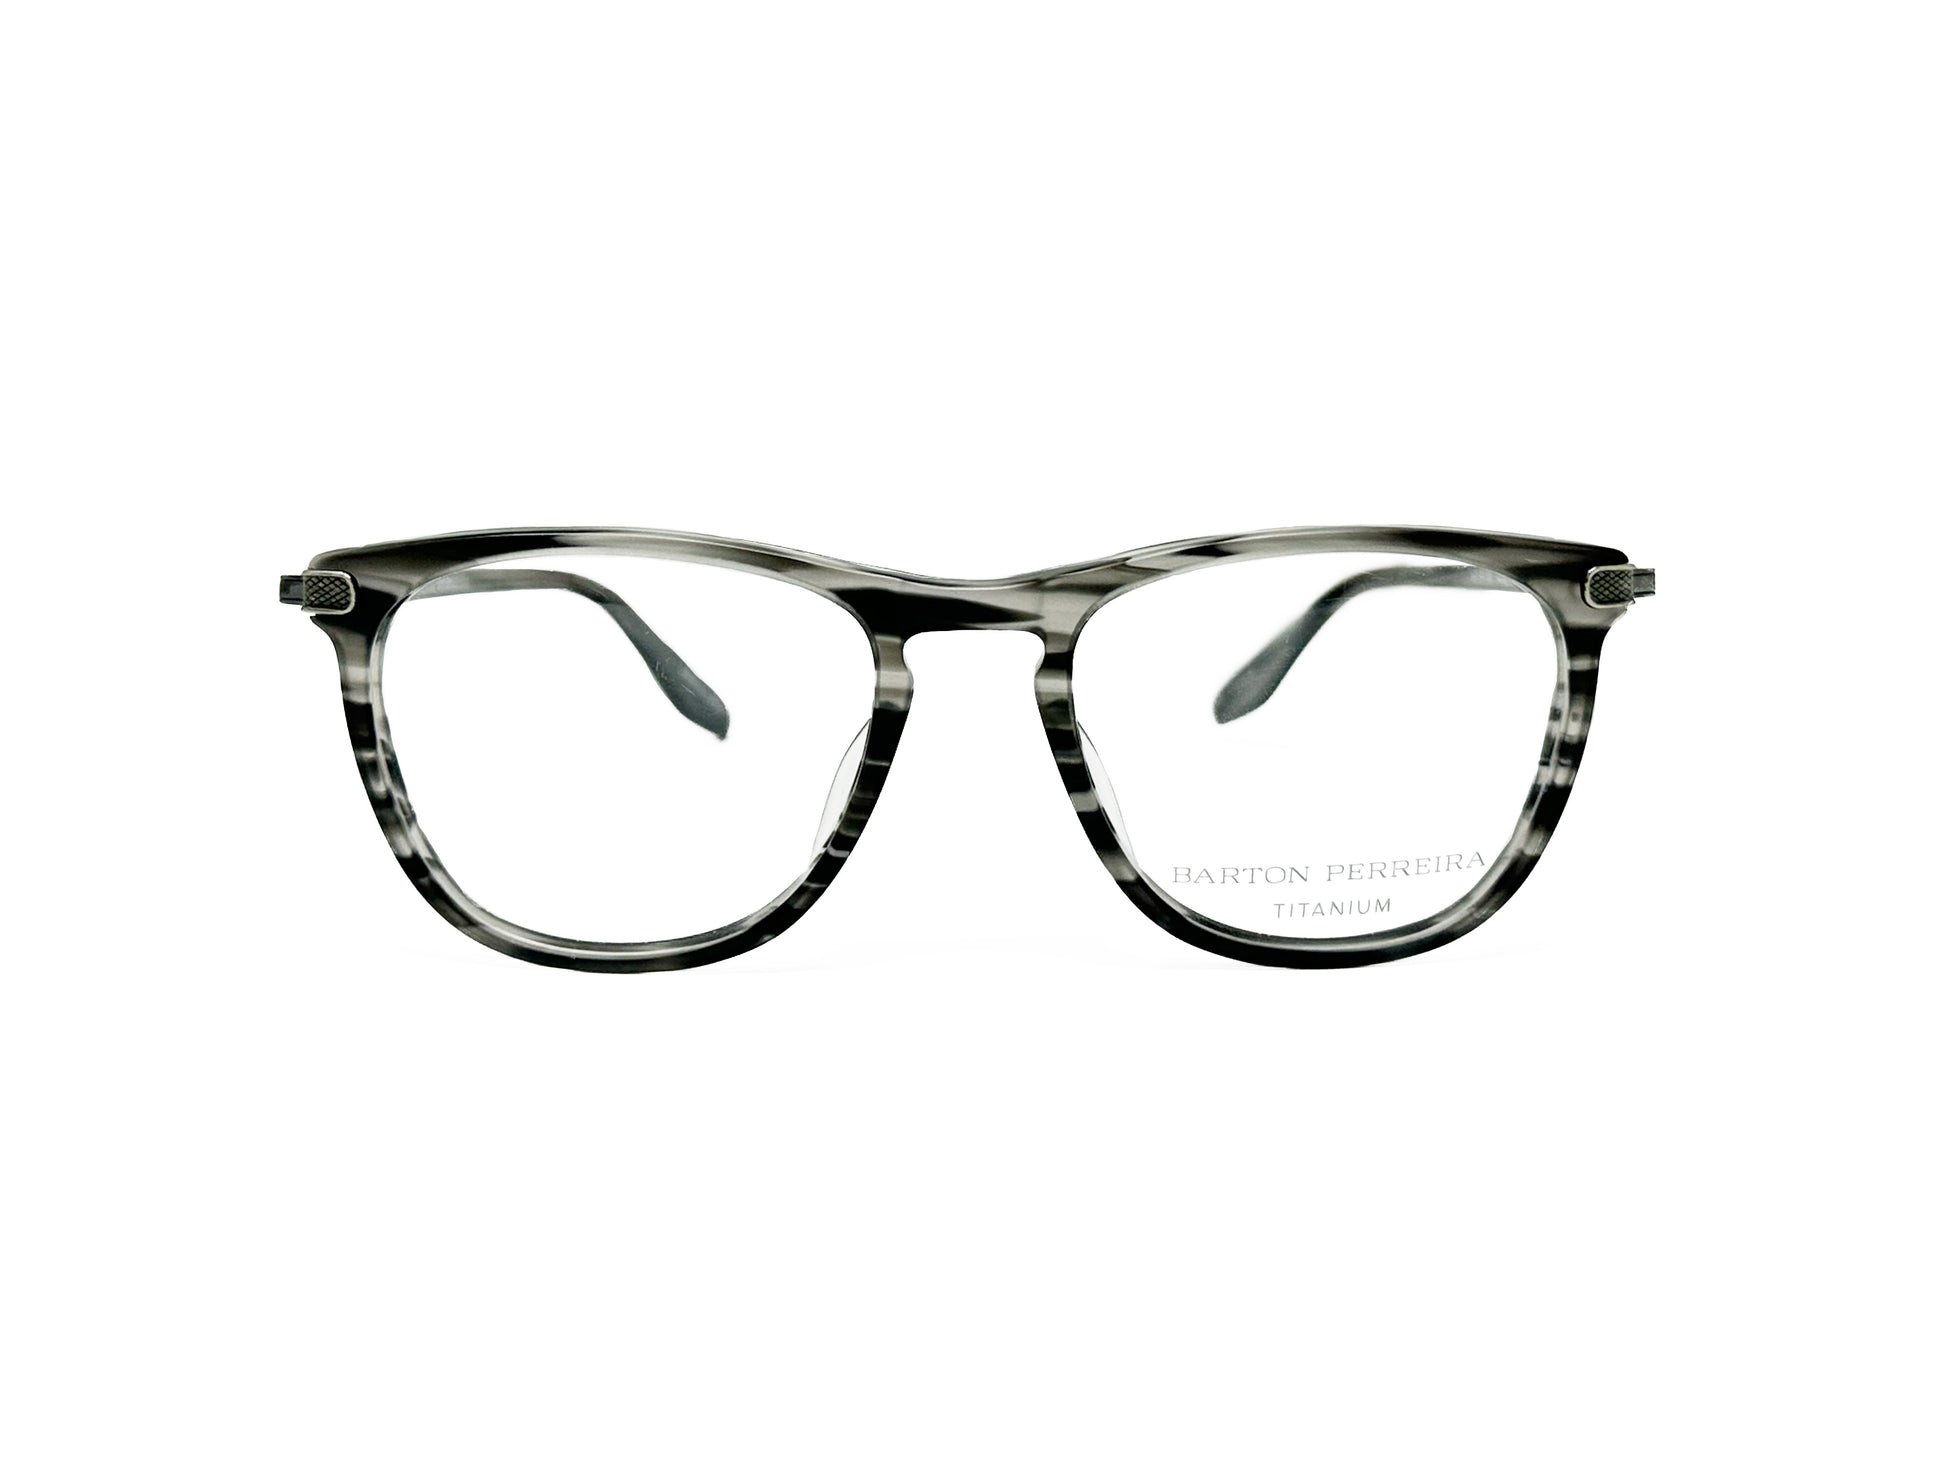 Barton Perreira square acetate optical frame. Model: Lautner. Color: MGM/PEW - Grey and black stripes. Front view. 